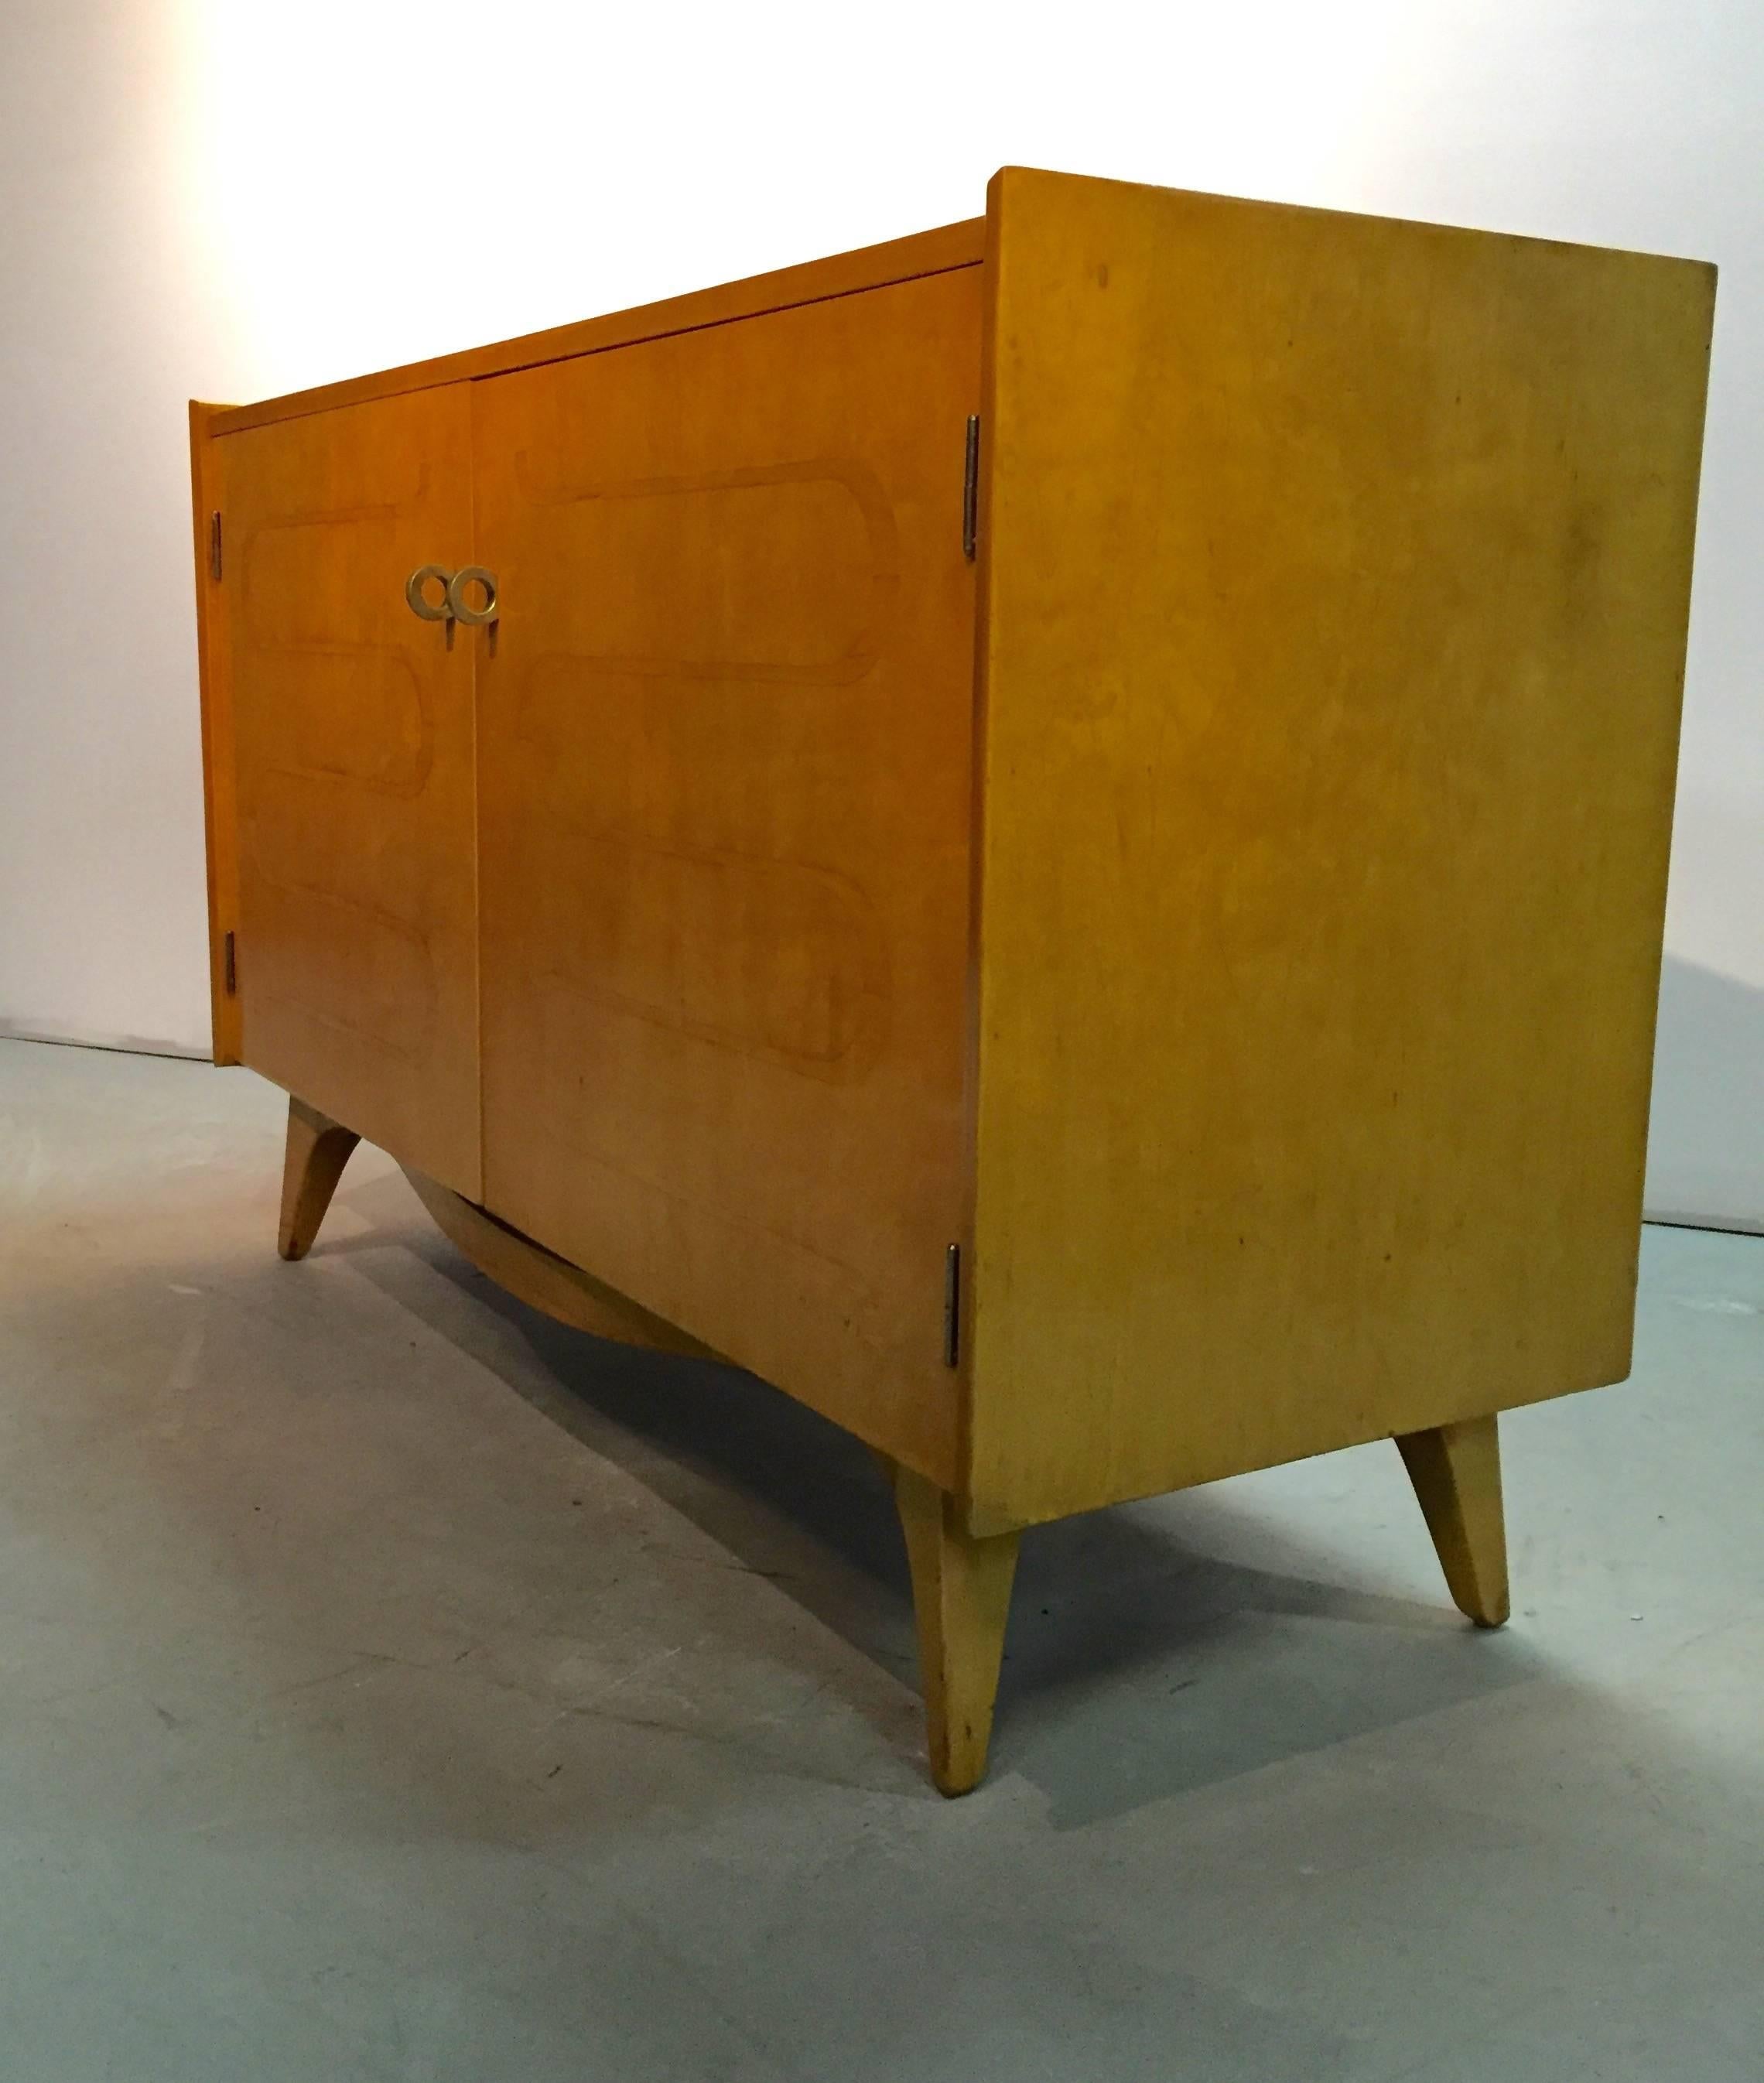 Swedish made cabinet from designer Edmond Spence. Featuring inlaid doors and hand-wrought brass hardware. A pair of adjustable height shelves and eight drawers are concealed by the doors. A beautiful and versatile cabinet. Recently restored to a